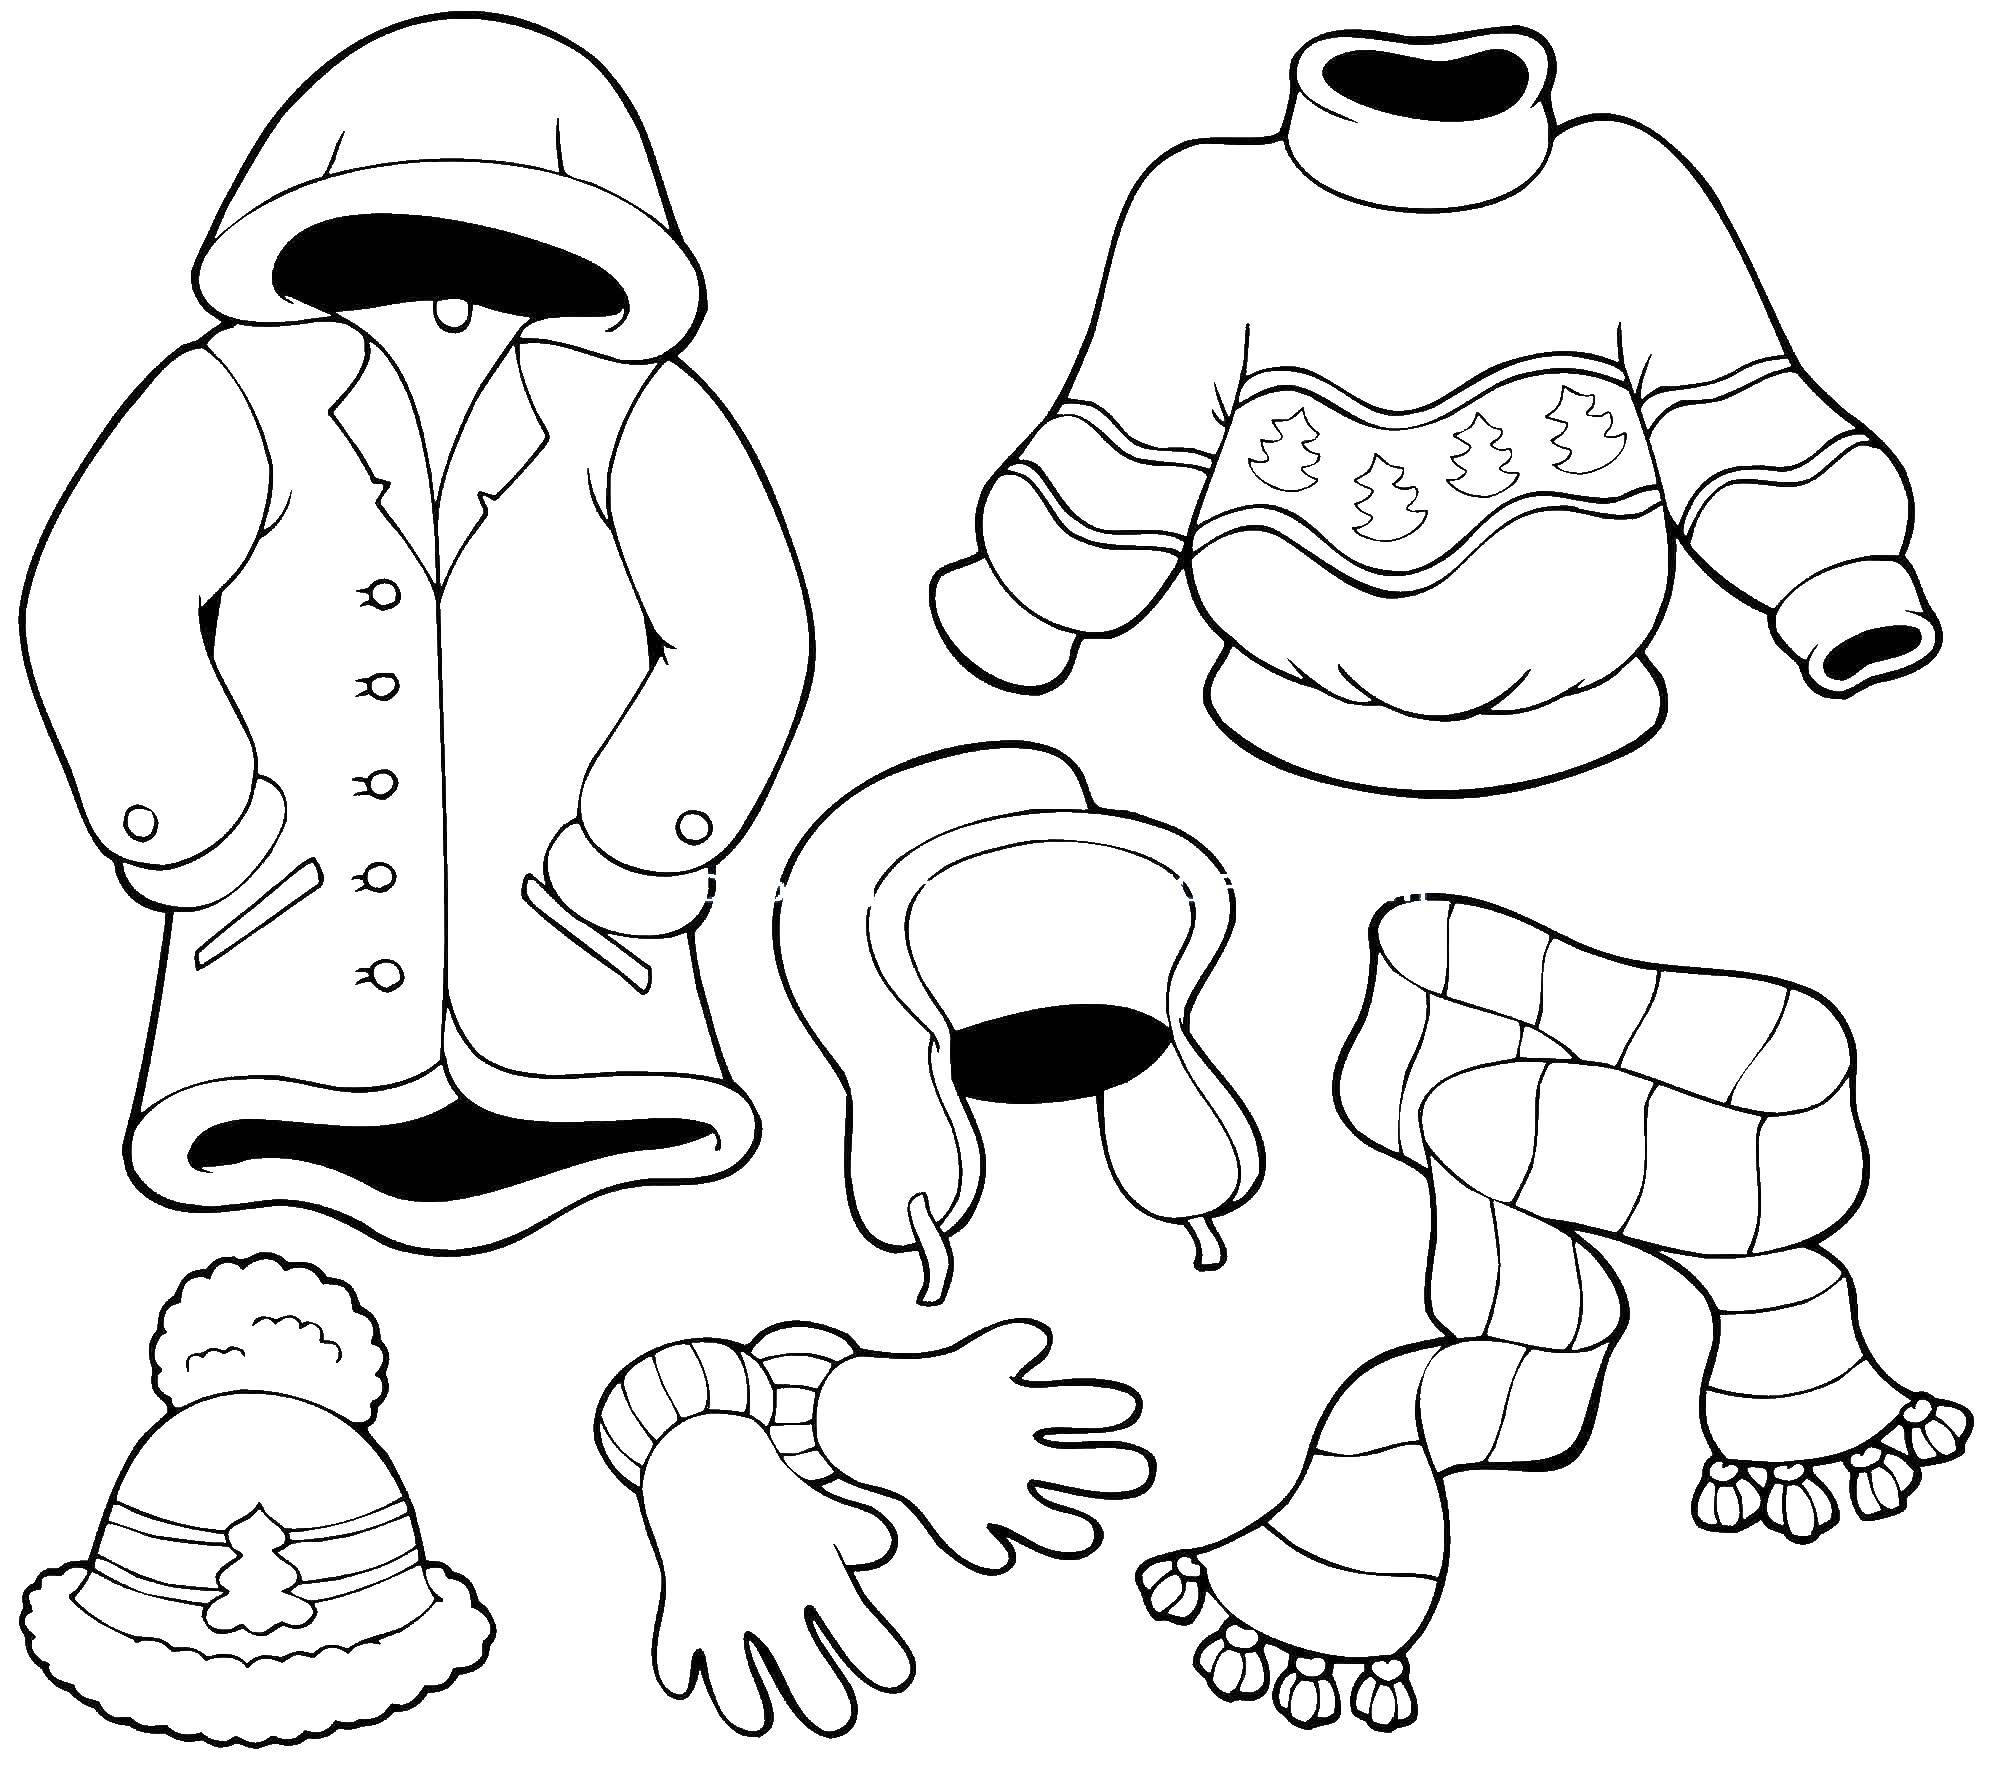 Coloring Winter clothes. Category Clothing. Tags:  Clothing, winter.